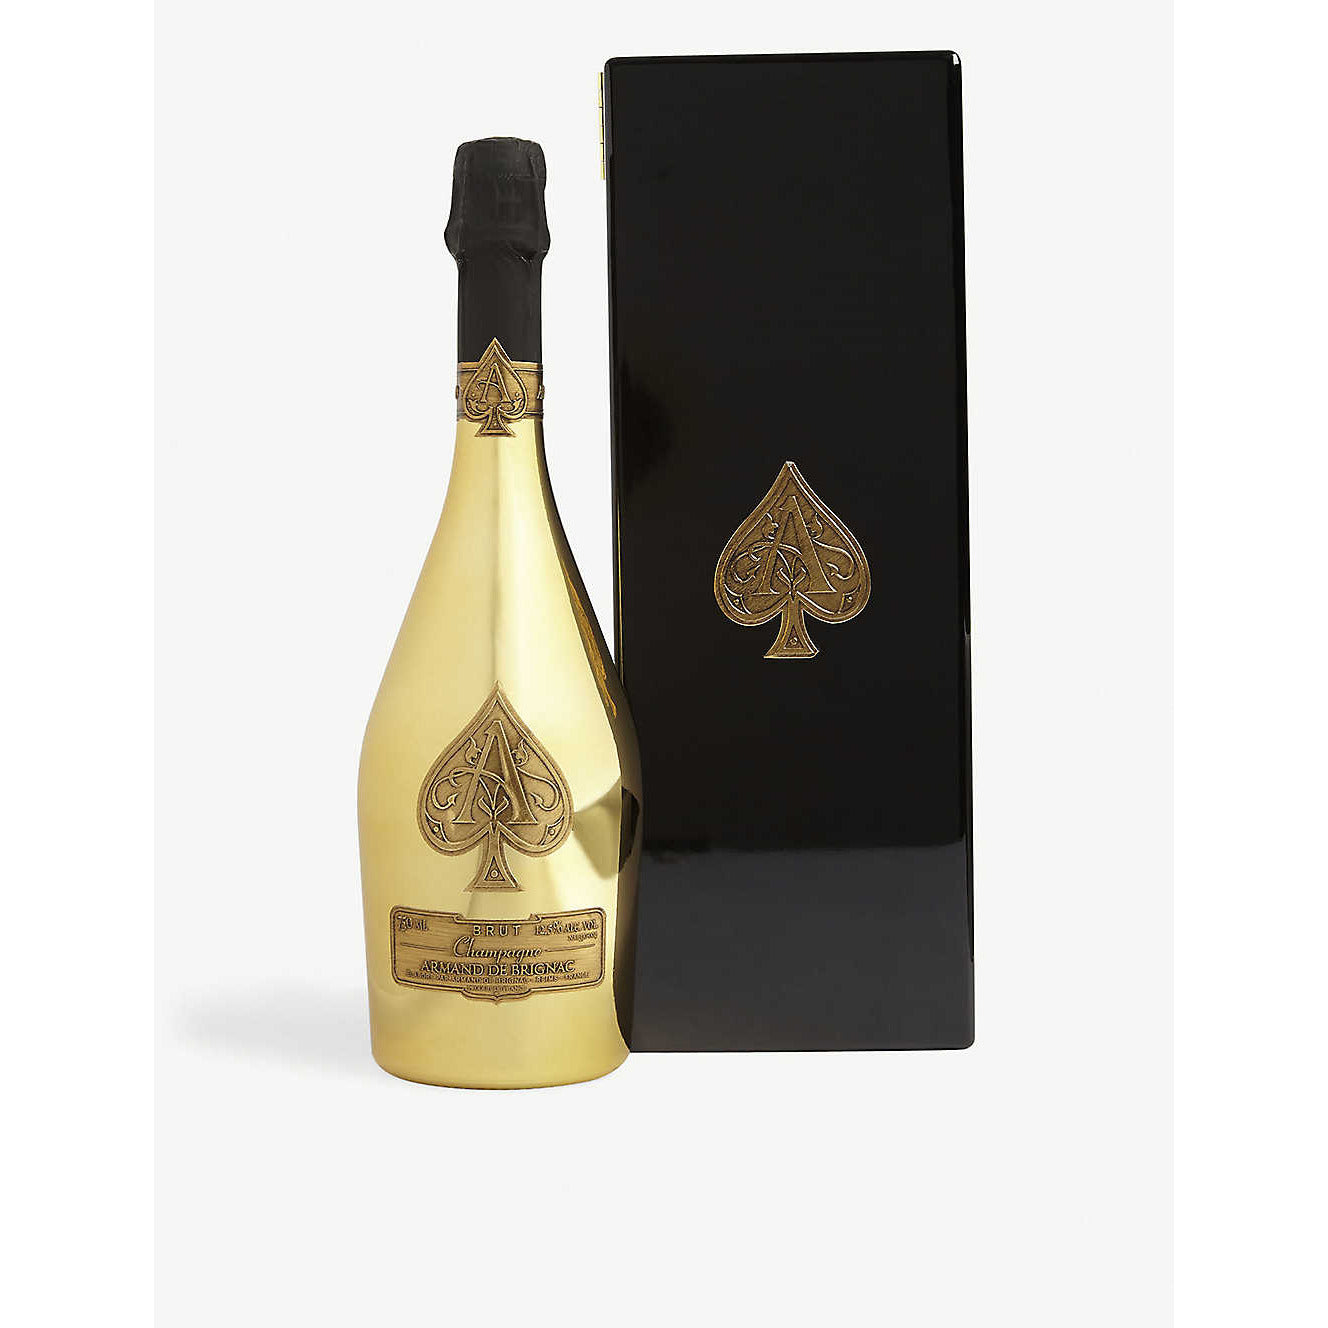 Jay Z's latest Ace of Spades champagne will cost $850